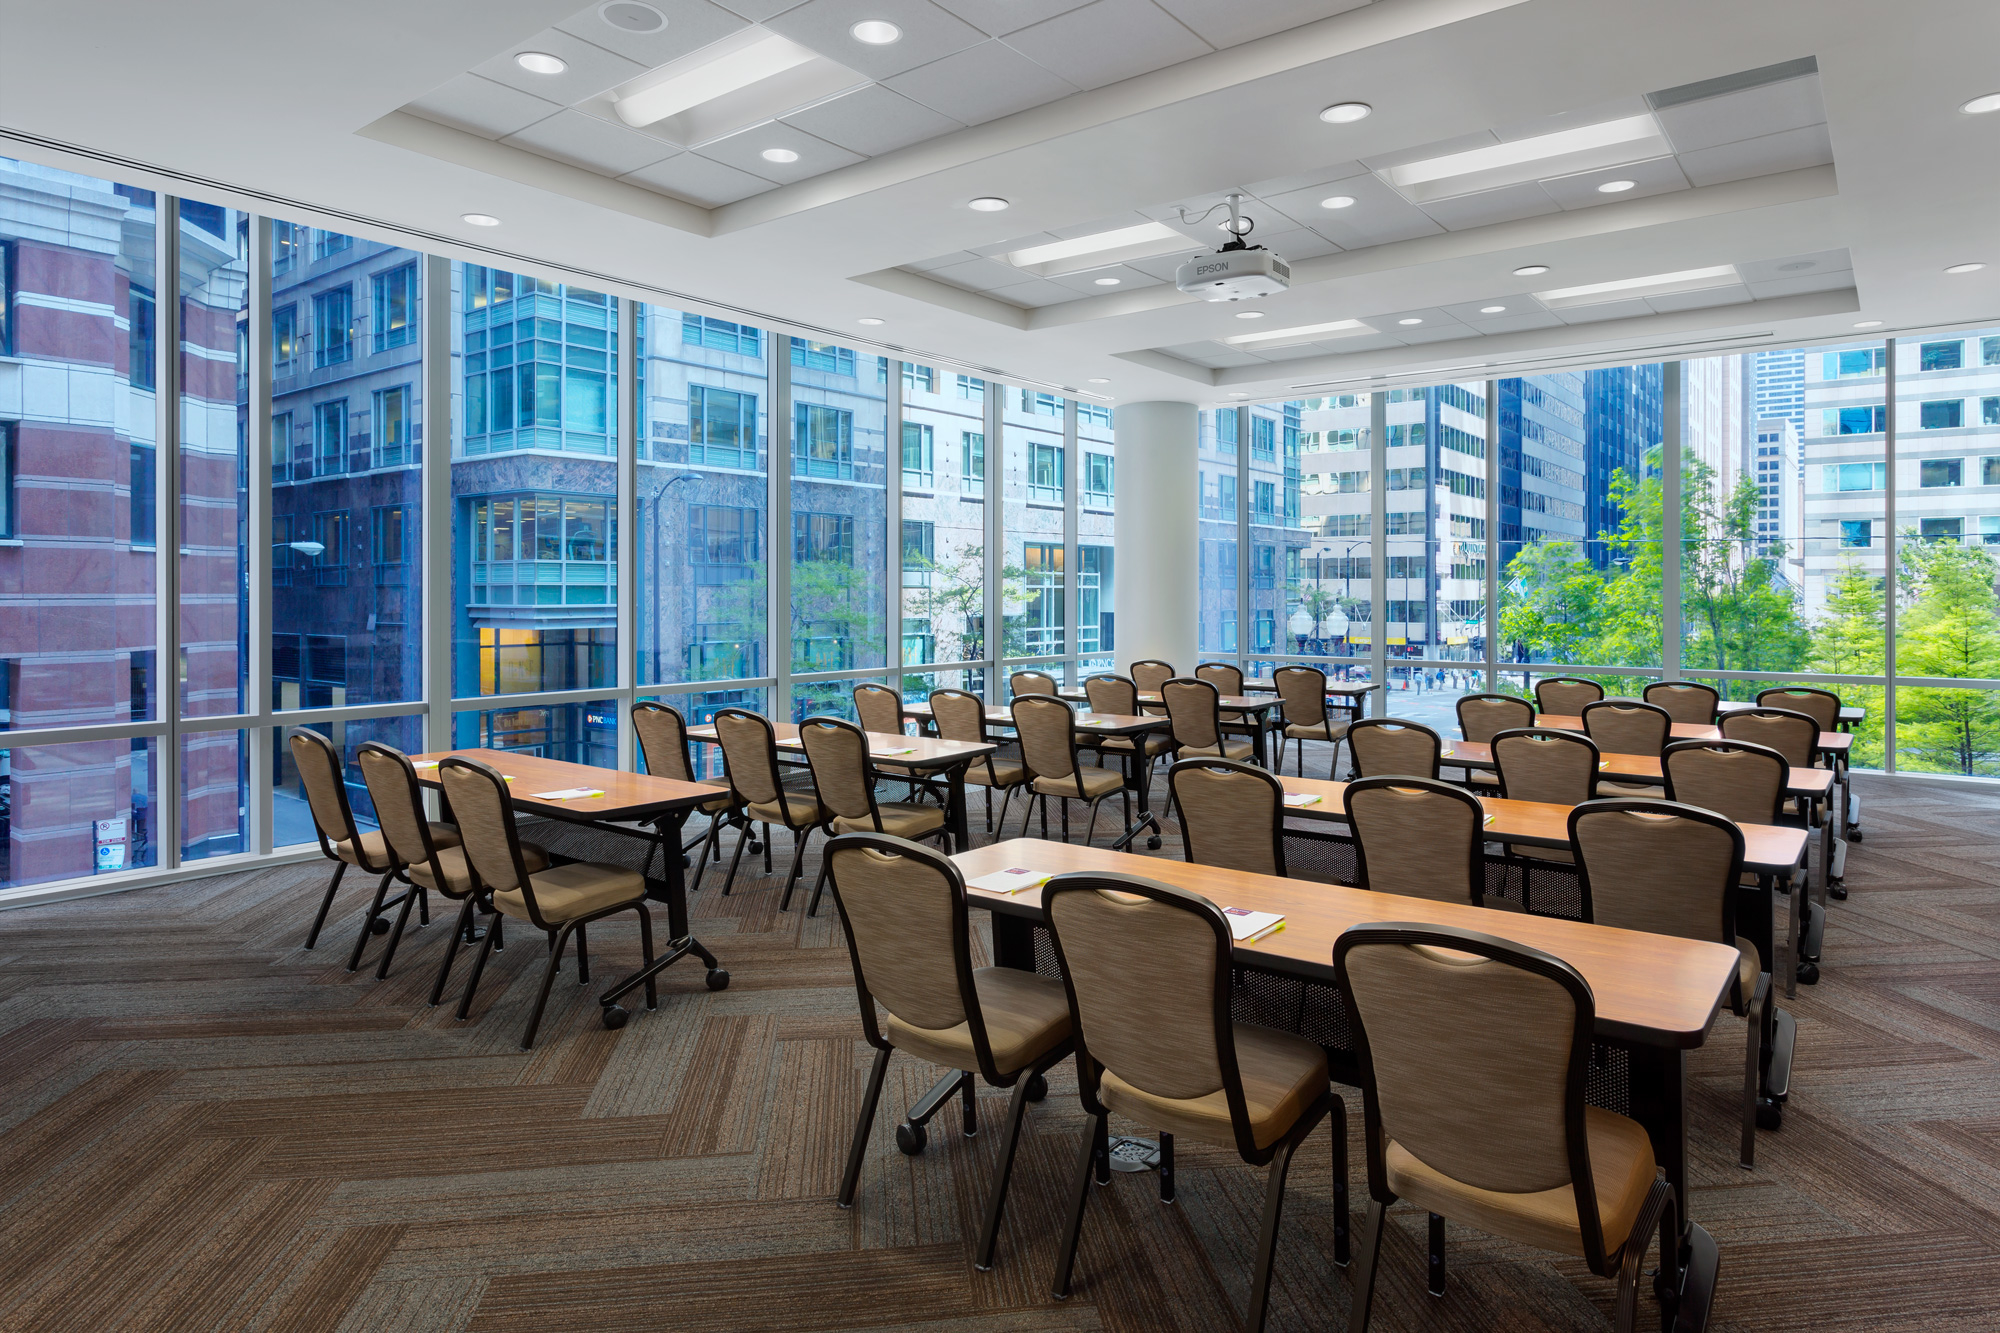 Take advantage of our 2,300 square feet of flexible, high-tech event space with floor to ceiling windows for your next business meeting, reunion, or social event.